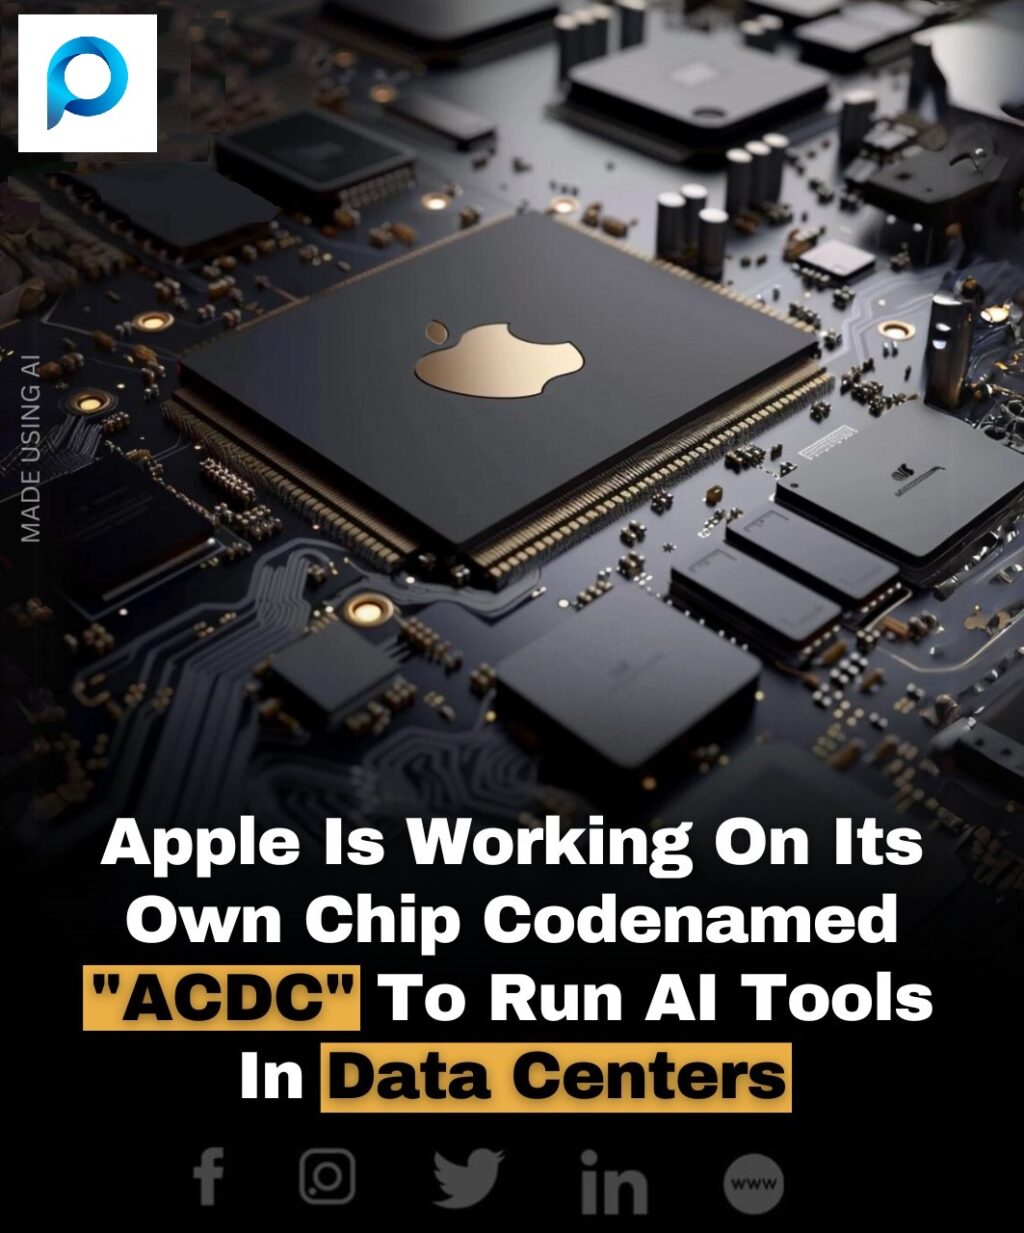 Apple is in the process of developing a chip internally named ACDC to support AI applications within Datacenters